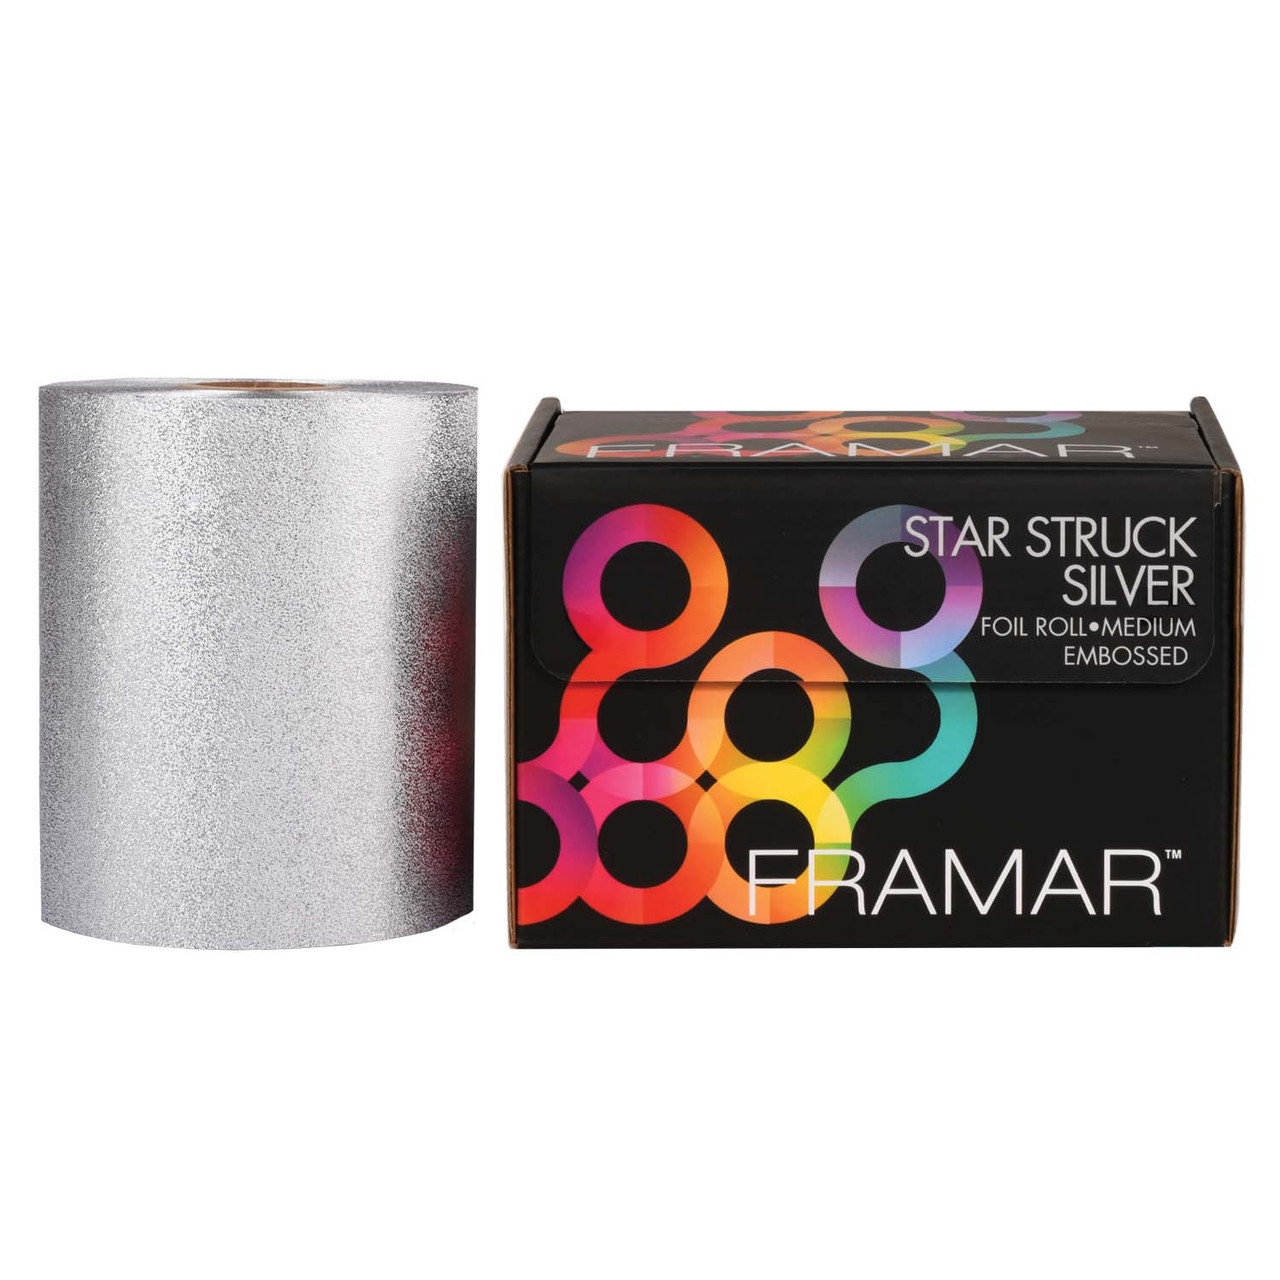 Every Framar Foil You Can Purchase From Us